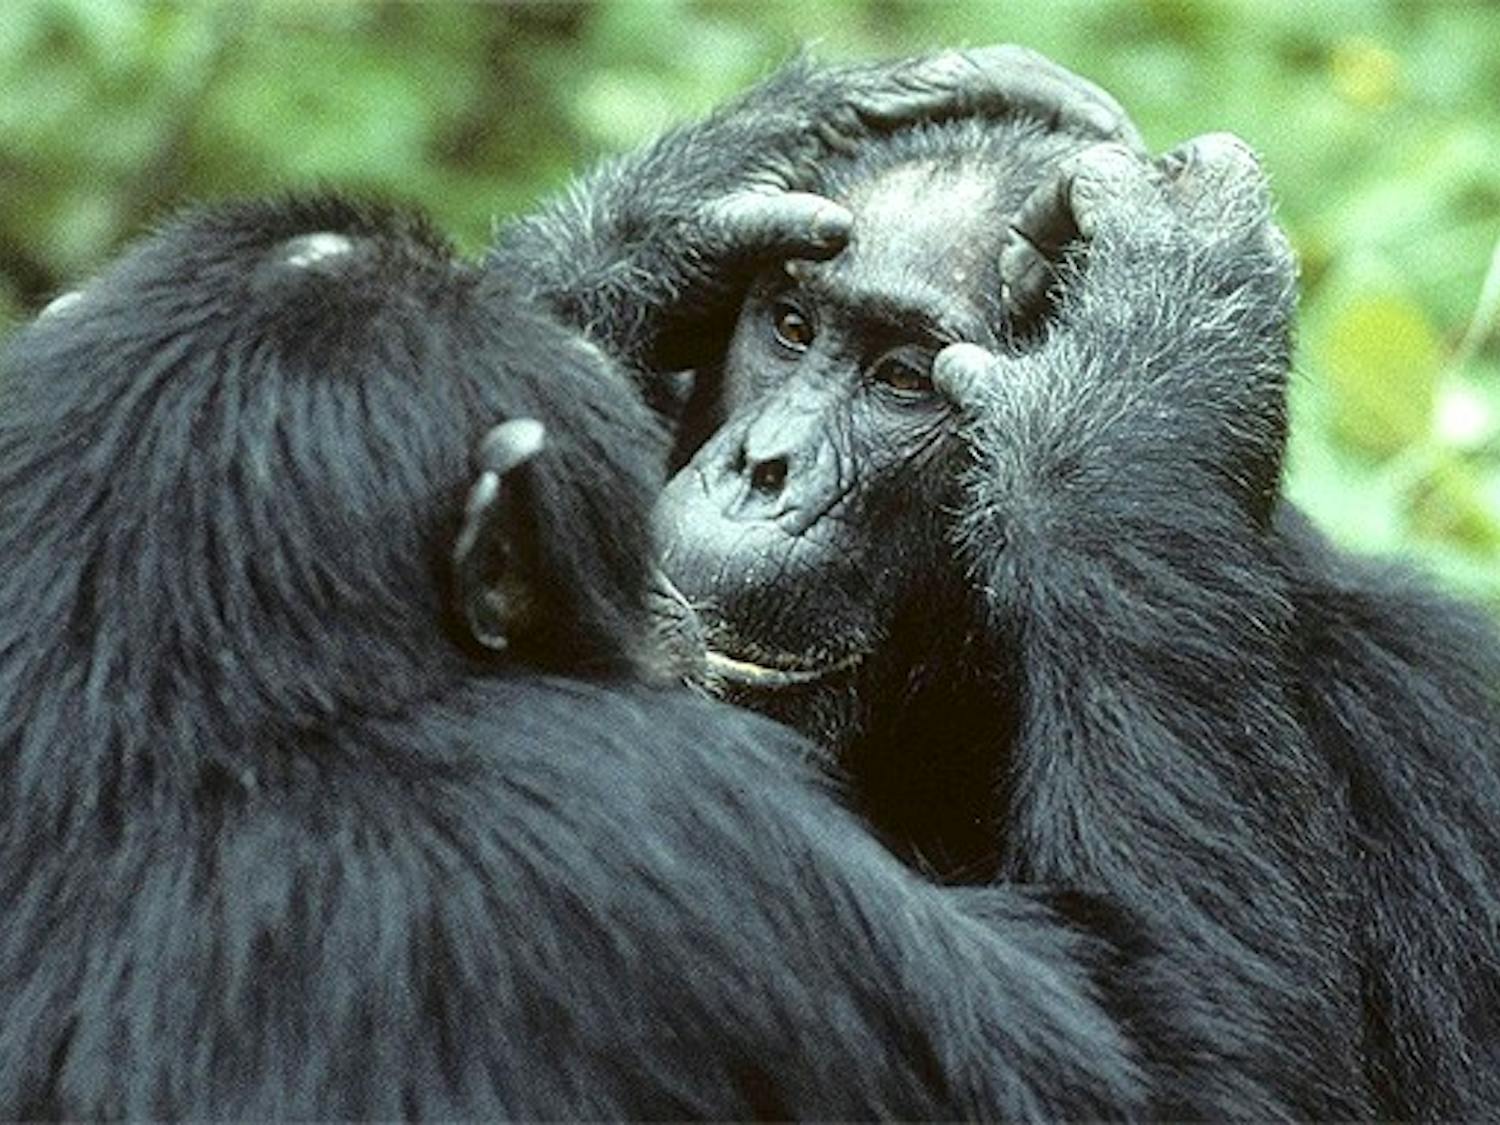 Two middle-aged male chimpanzees, who contributed to research on primate aging trends, groom each other in Tanzania’s Gombe National Park.